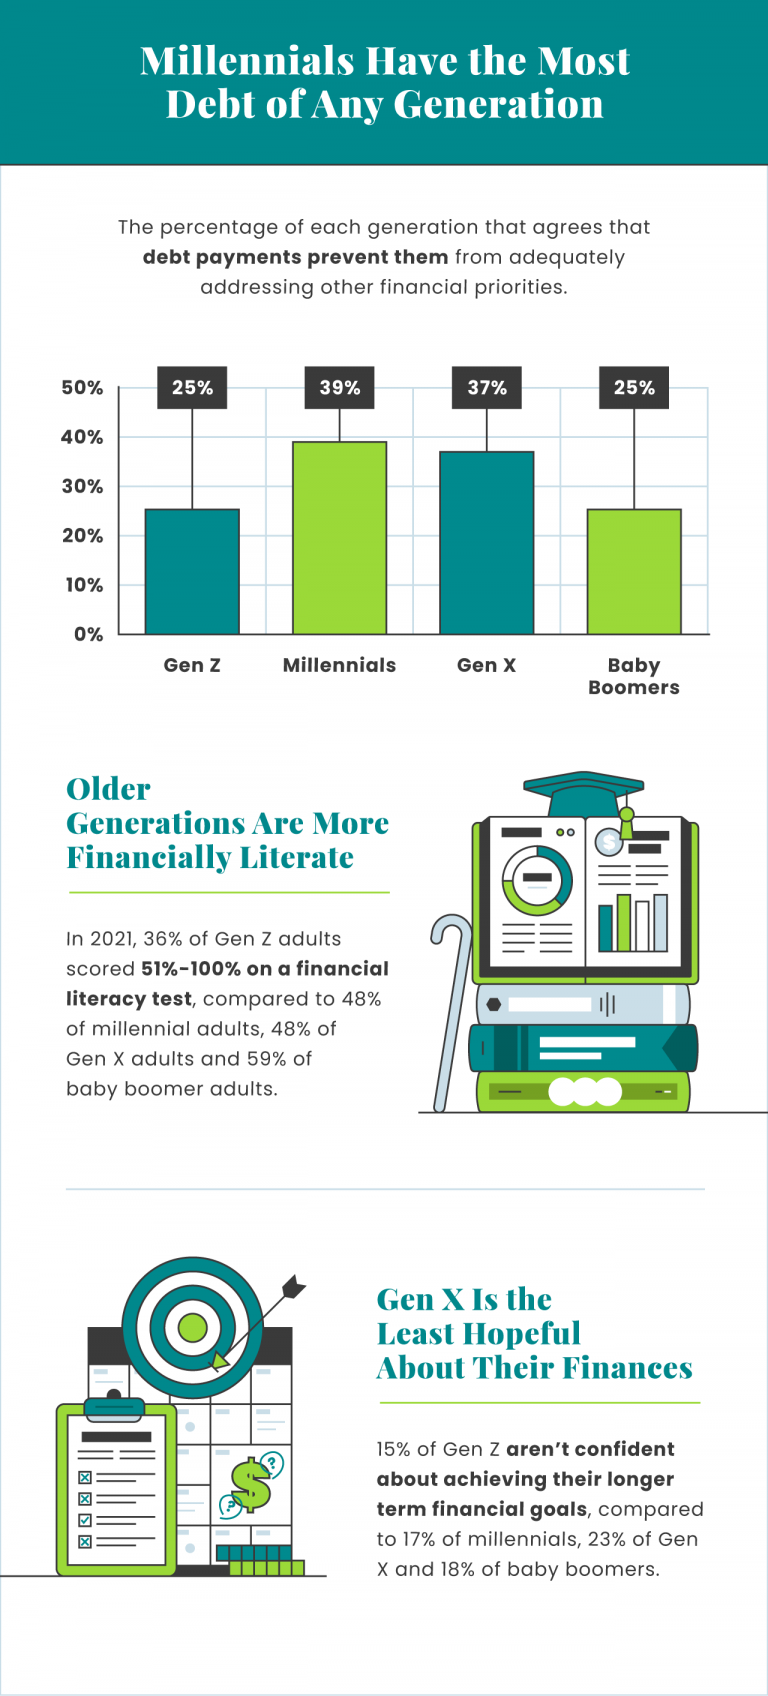 Millenials have the most debt of any generation